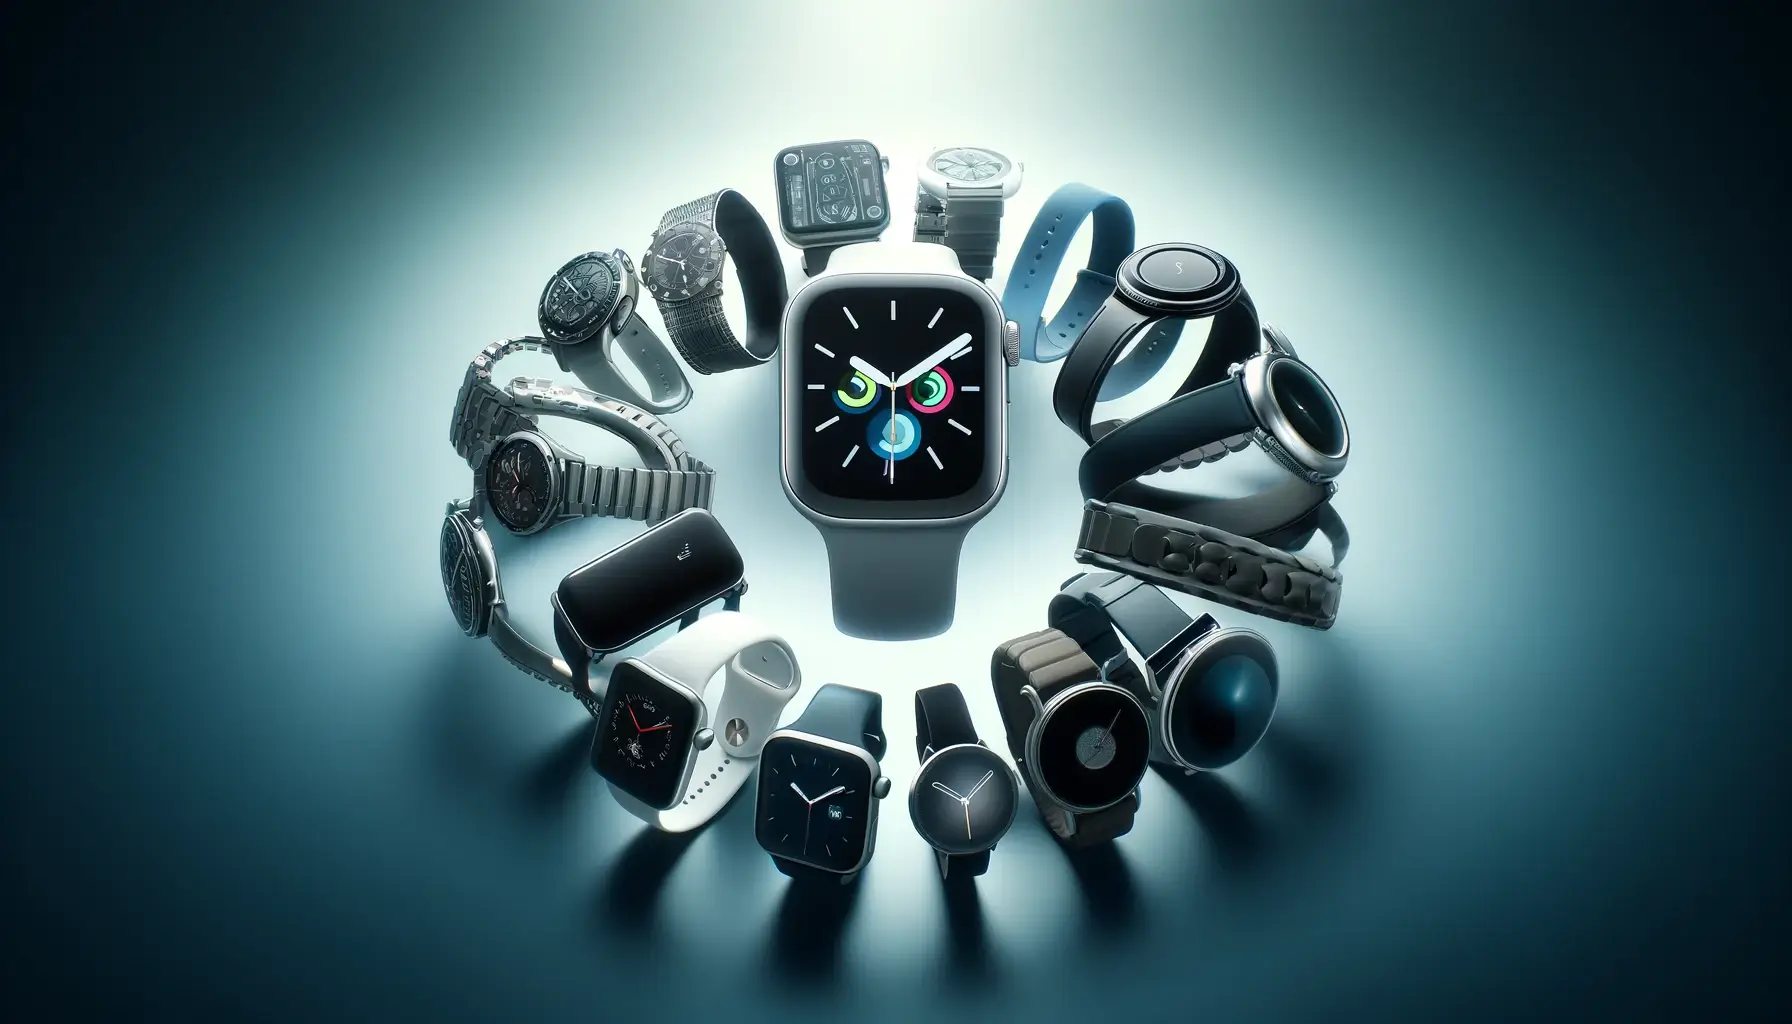 3 Reasons The Apple Watch is My Favourite Smartwatch and 3 Reasons I Prefer Others